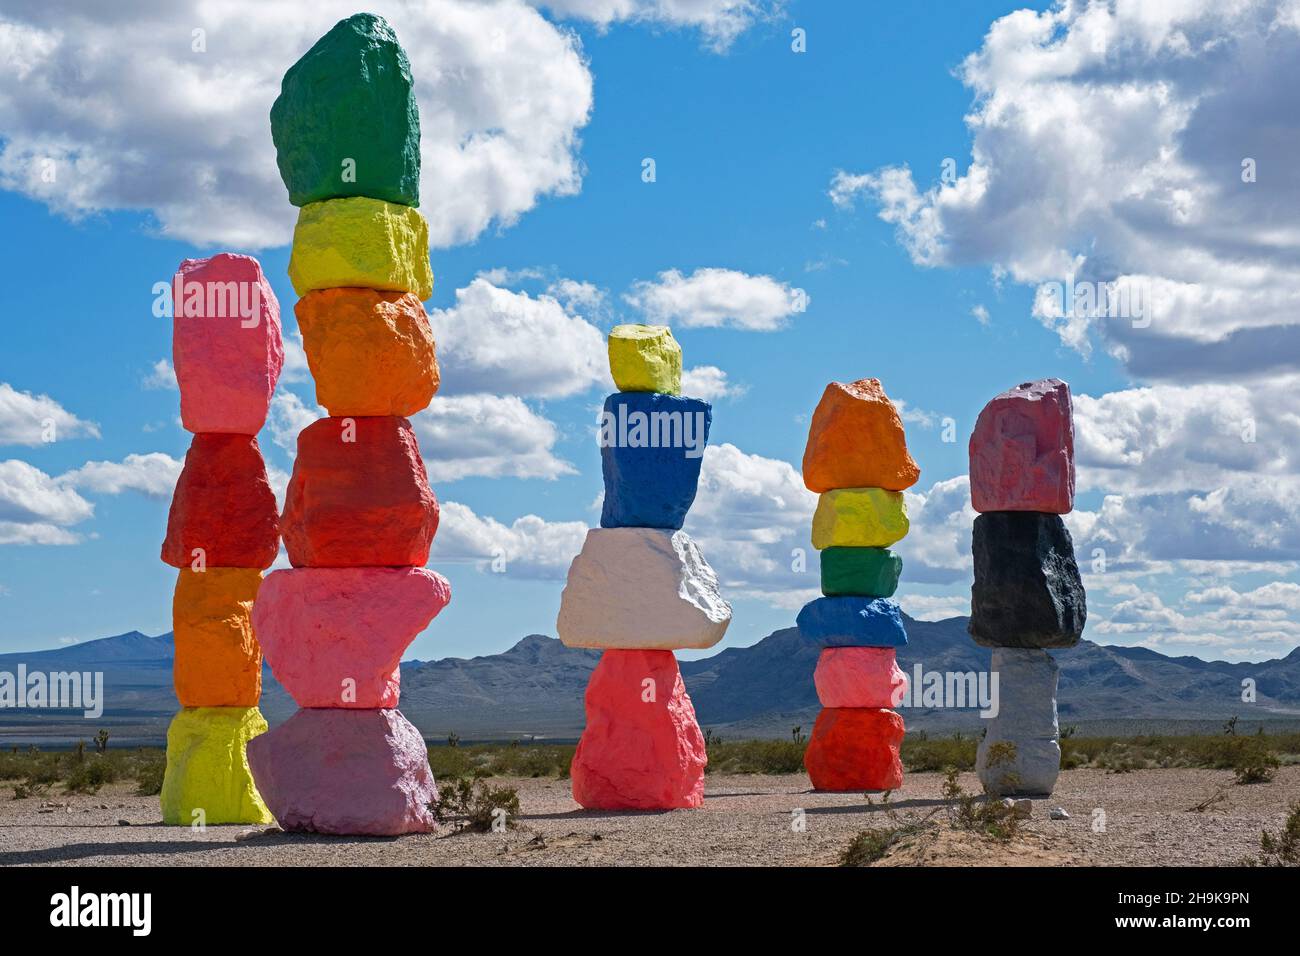 Seven Magic Mountains / Seven Sisters, art installation made of colorful, stacked boulders in Ivanpah Valley near Las Vegas, Nevada, United States, US Stock Photo